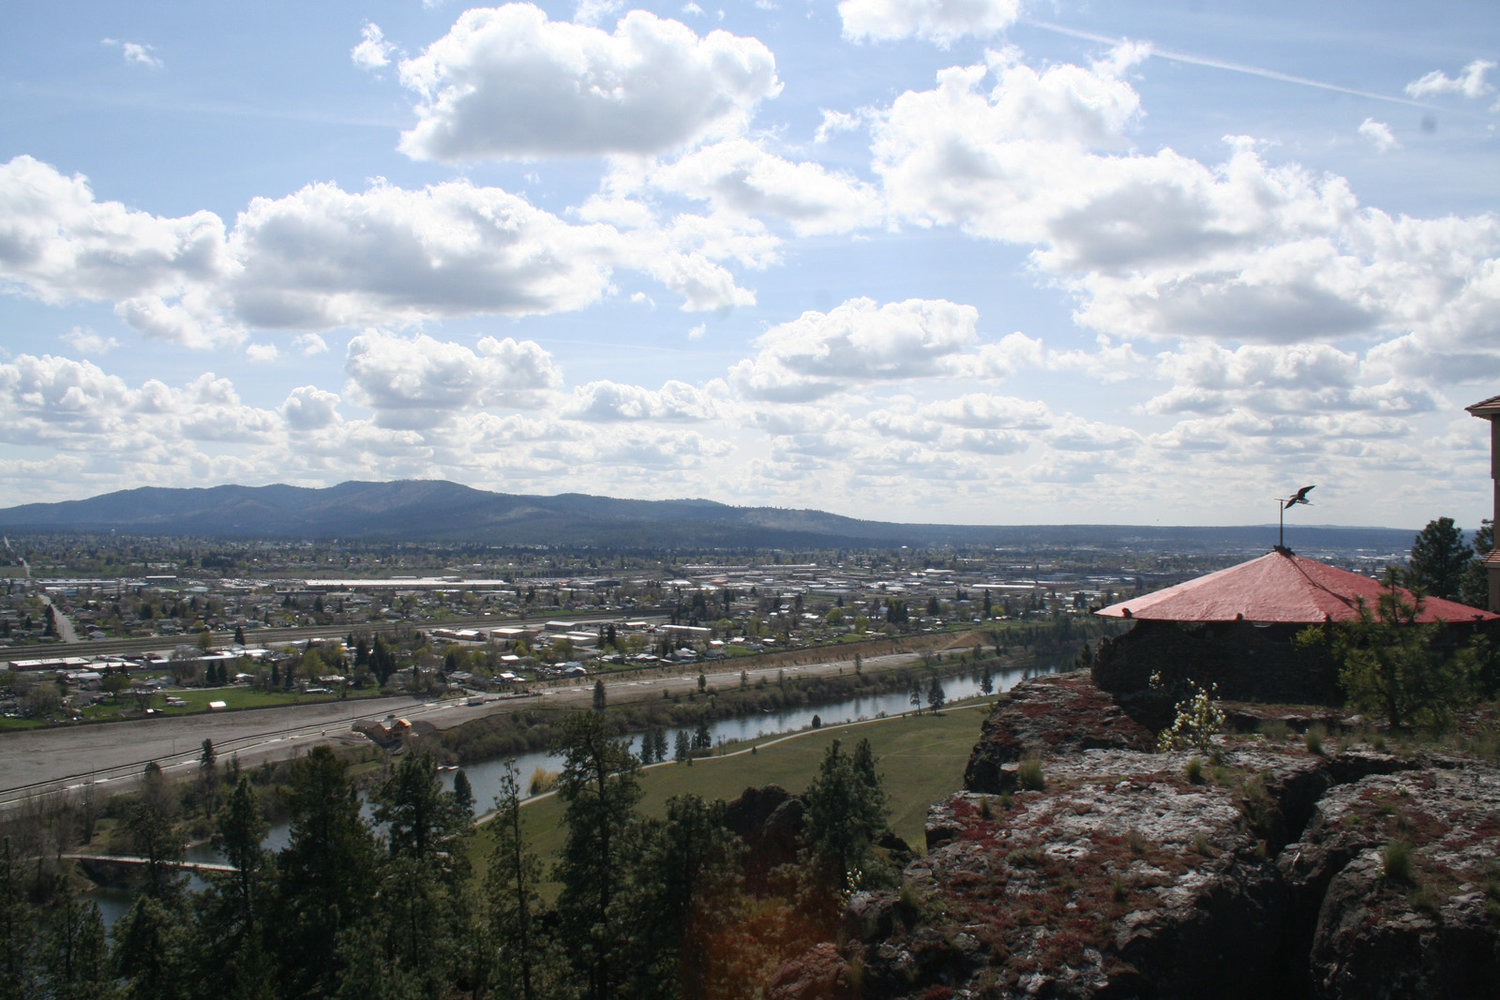 a landscape photo with a beautiful blue sky, low mountains, a small city, and a river